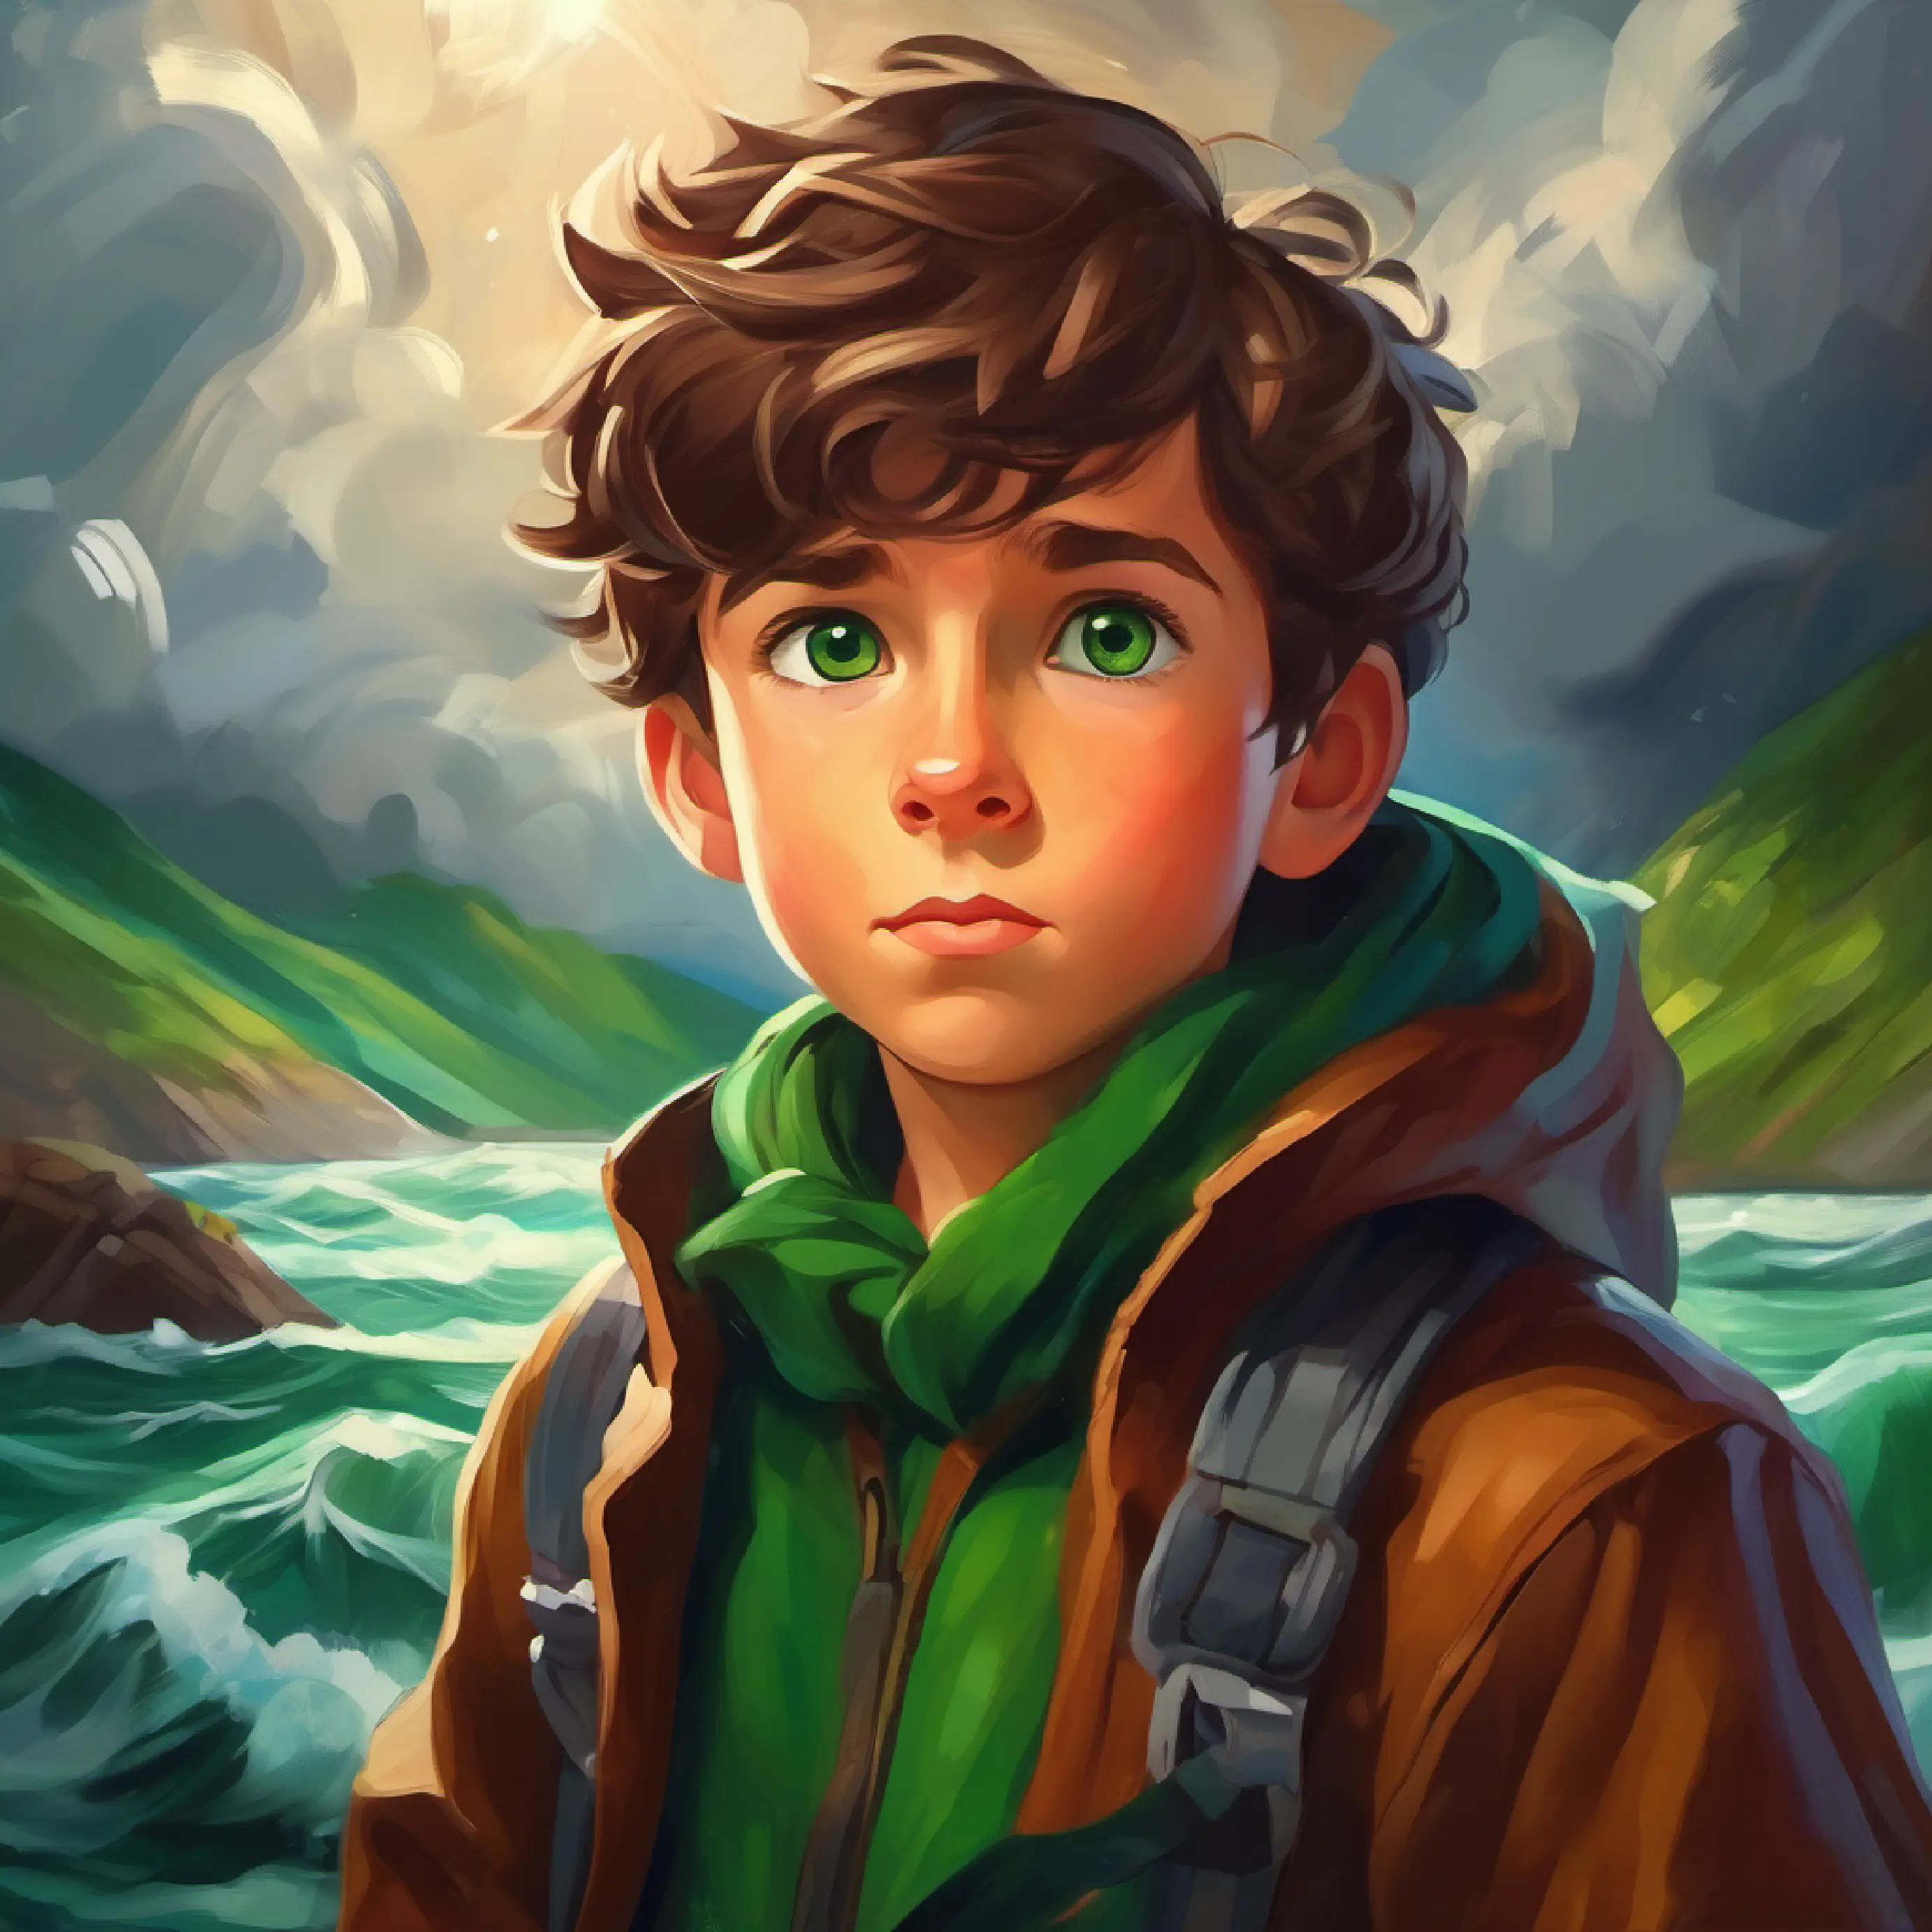 Young, brave boy with brown hair, green eyes, ready for adventure calms himself and the storm, shows his influence